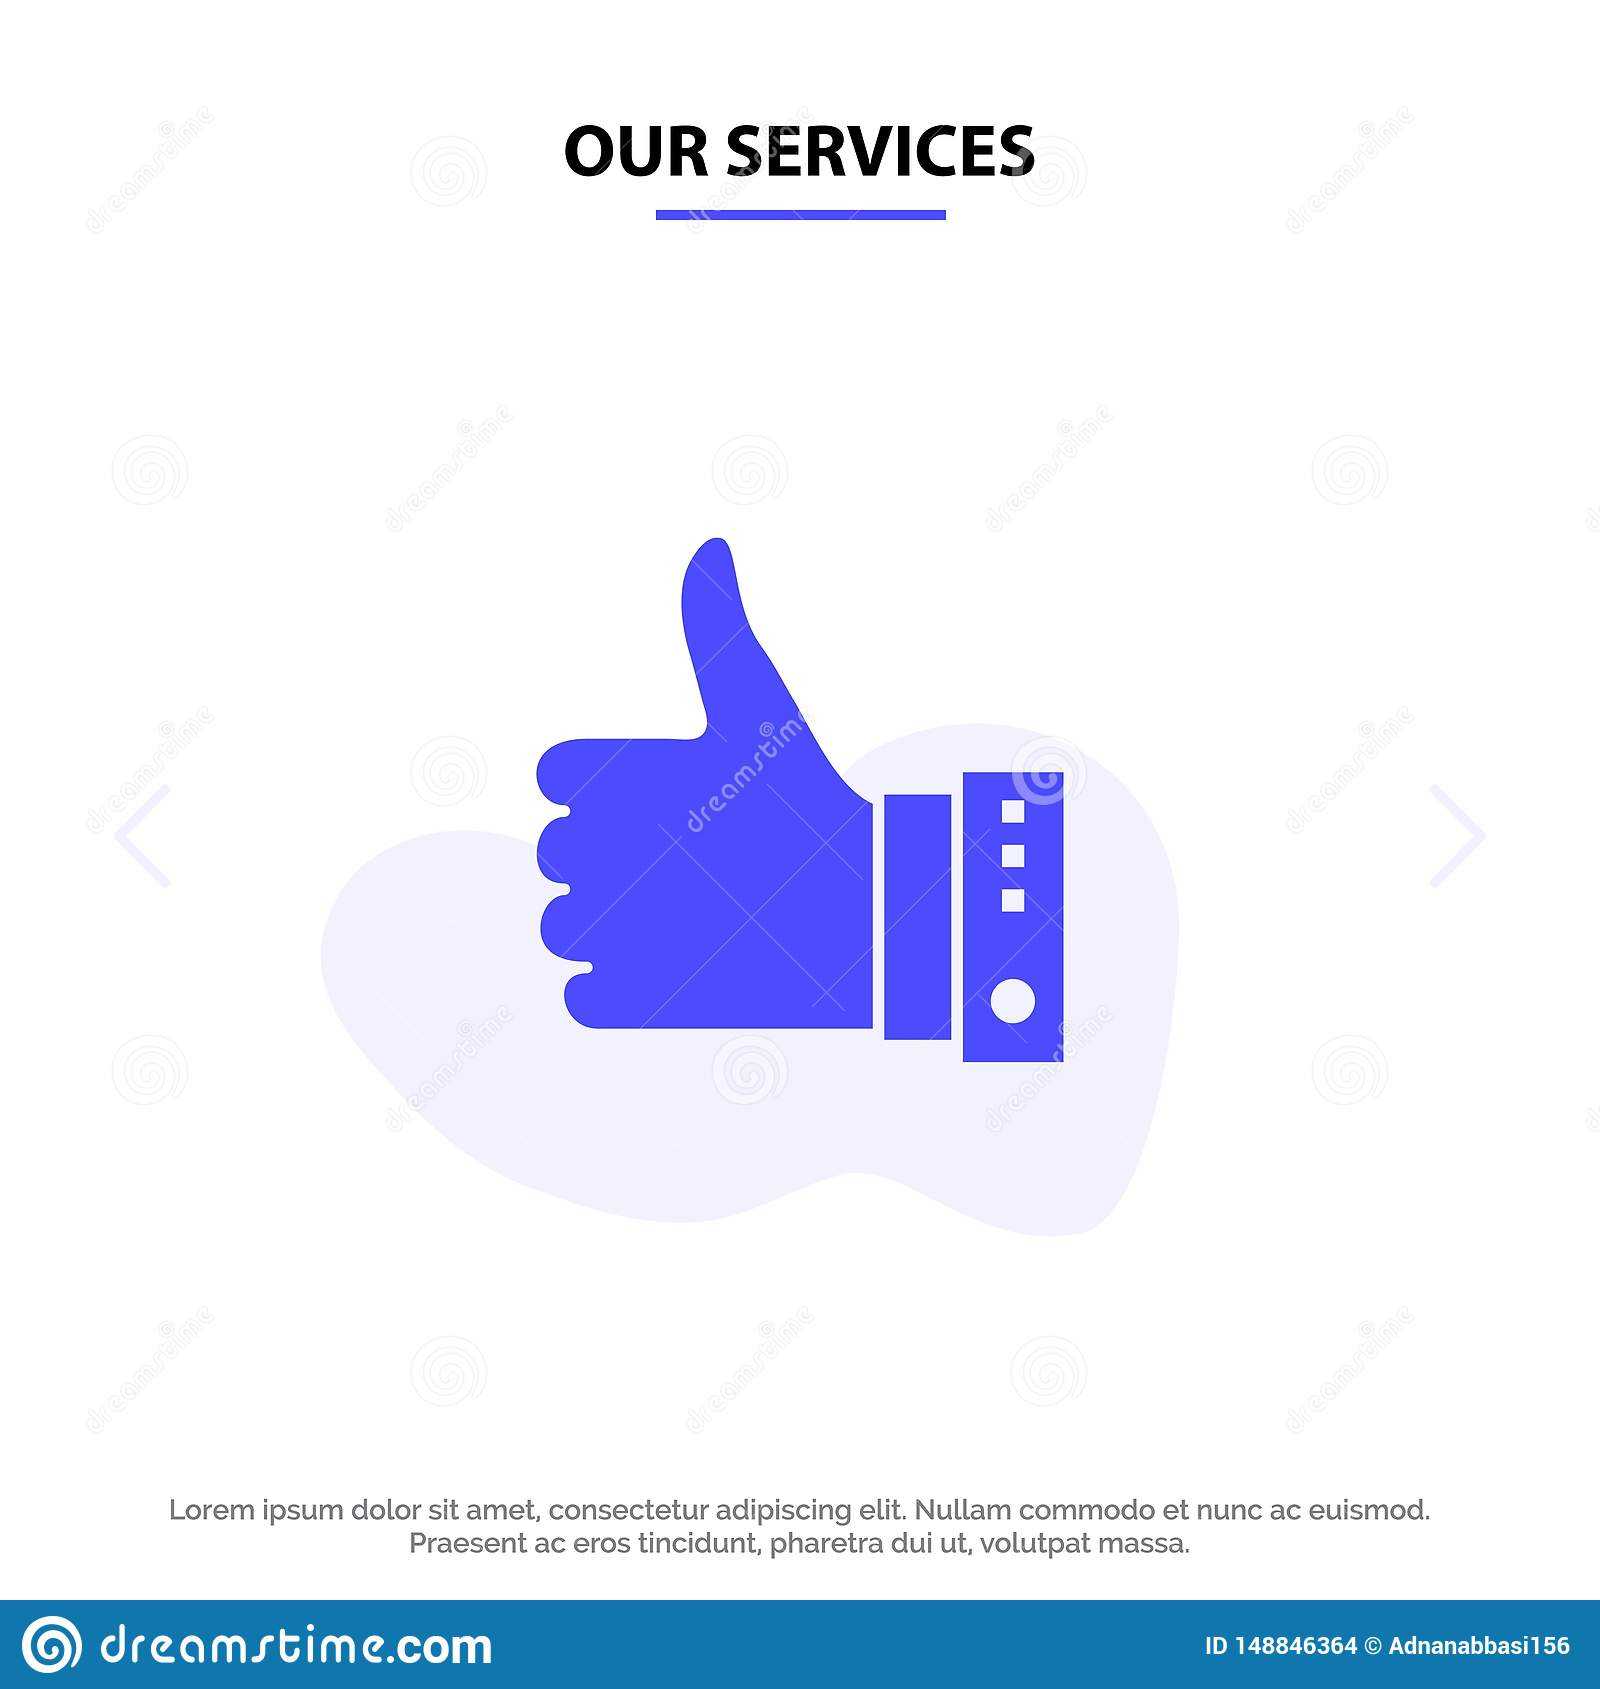 Our Services Like, Finger, Gesture, Hand, Thumbs, Up, Yes In Decision Card Template